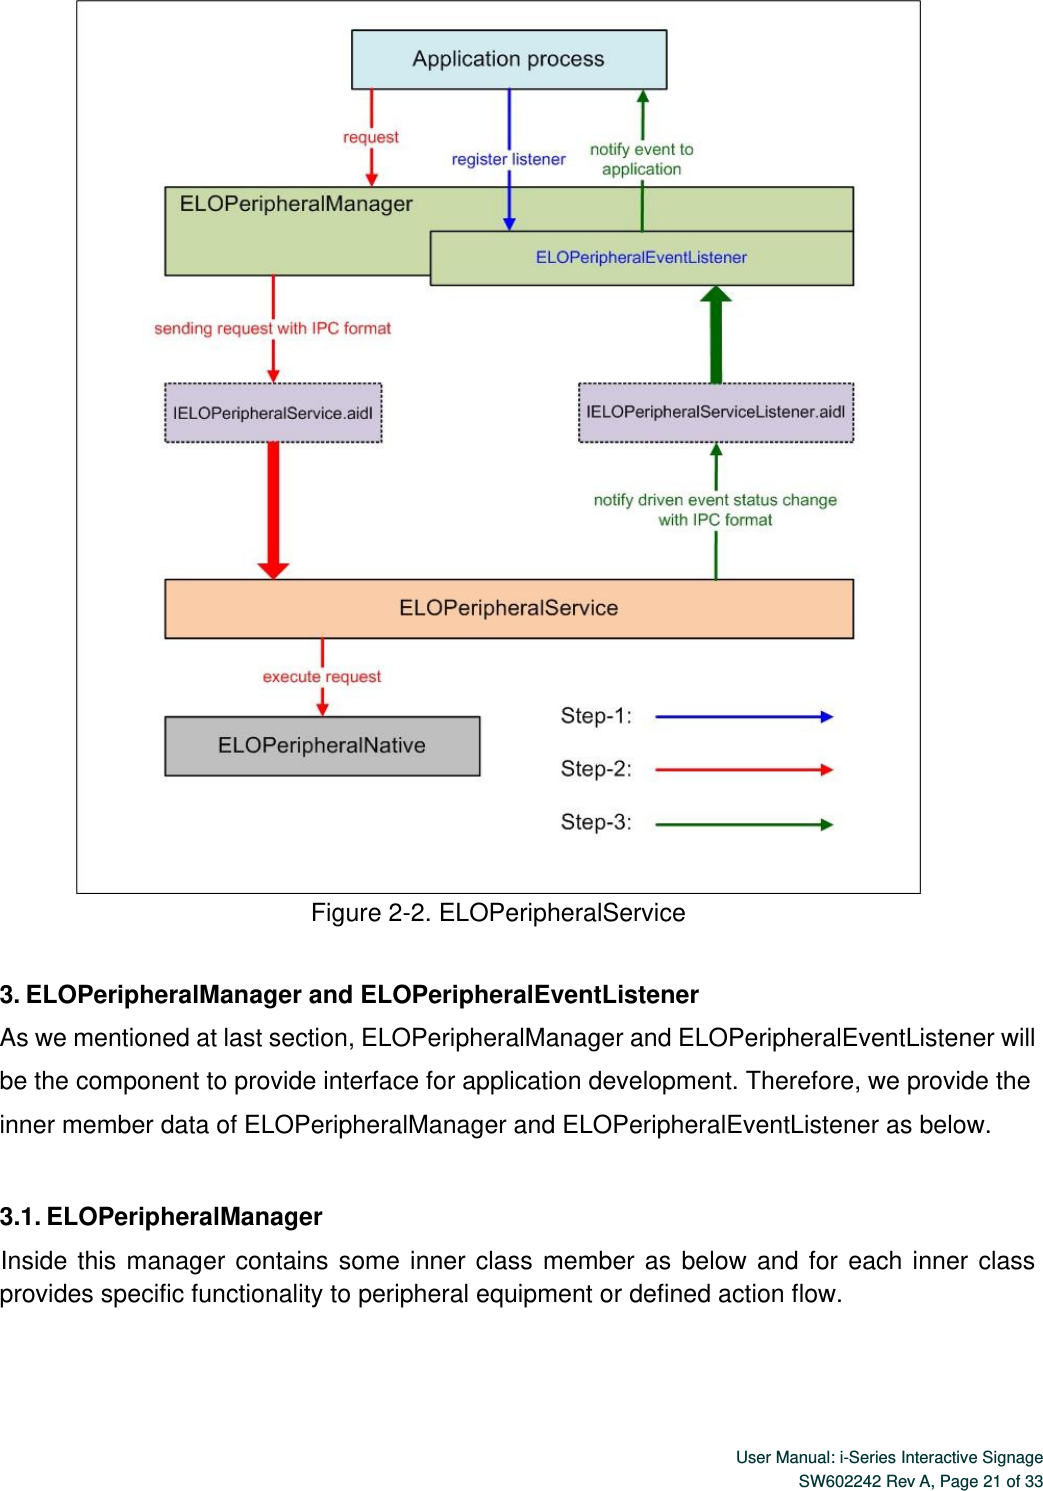  User Manual: i-Series Interactive Signage SW602242 Rev A, Page 21 of 33    Figure 2-2. ELOPeripheralService  3. ELOPeripheralManager and ELOPeripheralEventListener As we mentioned at last section, ELOPeripheralManager and ELOPeripheralEventListener will be the component to provide interface for application development. Therefore, we provide the inner member data of ELOPeripheralManager and ELOPeripheralEventListener as below.  3.1. ELOPeripheralManager Inside  this  manager  contains  some  inner  class  member  as  below  and  for  each  inner  class provides specific functionality to peripheral equipment or defined action flow. 